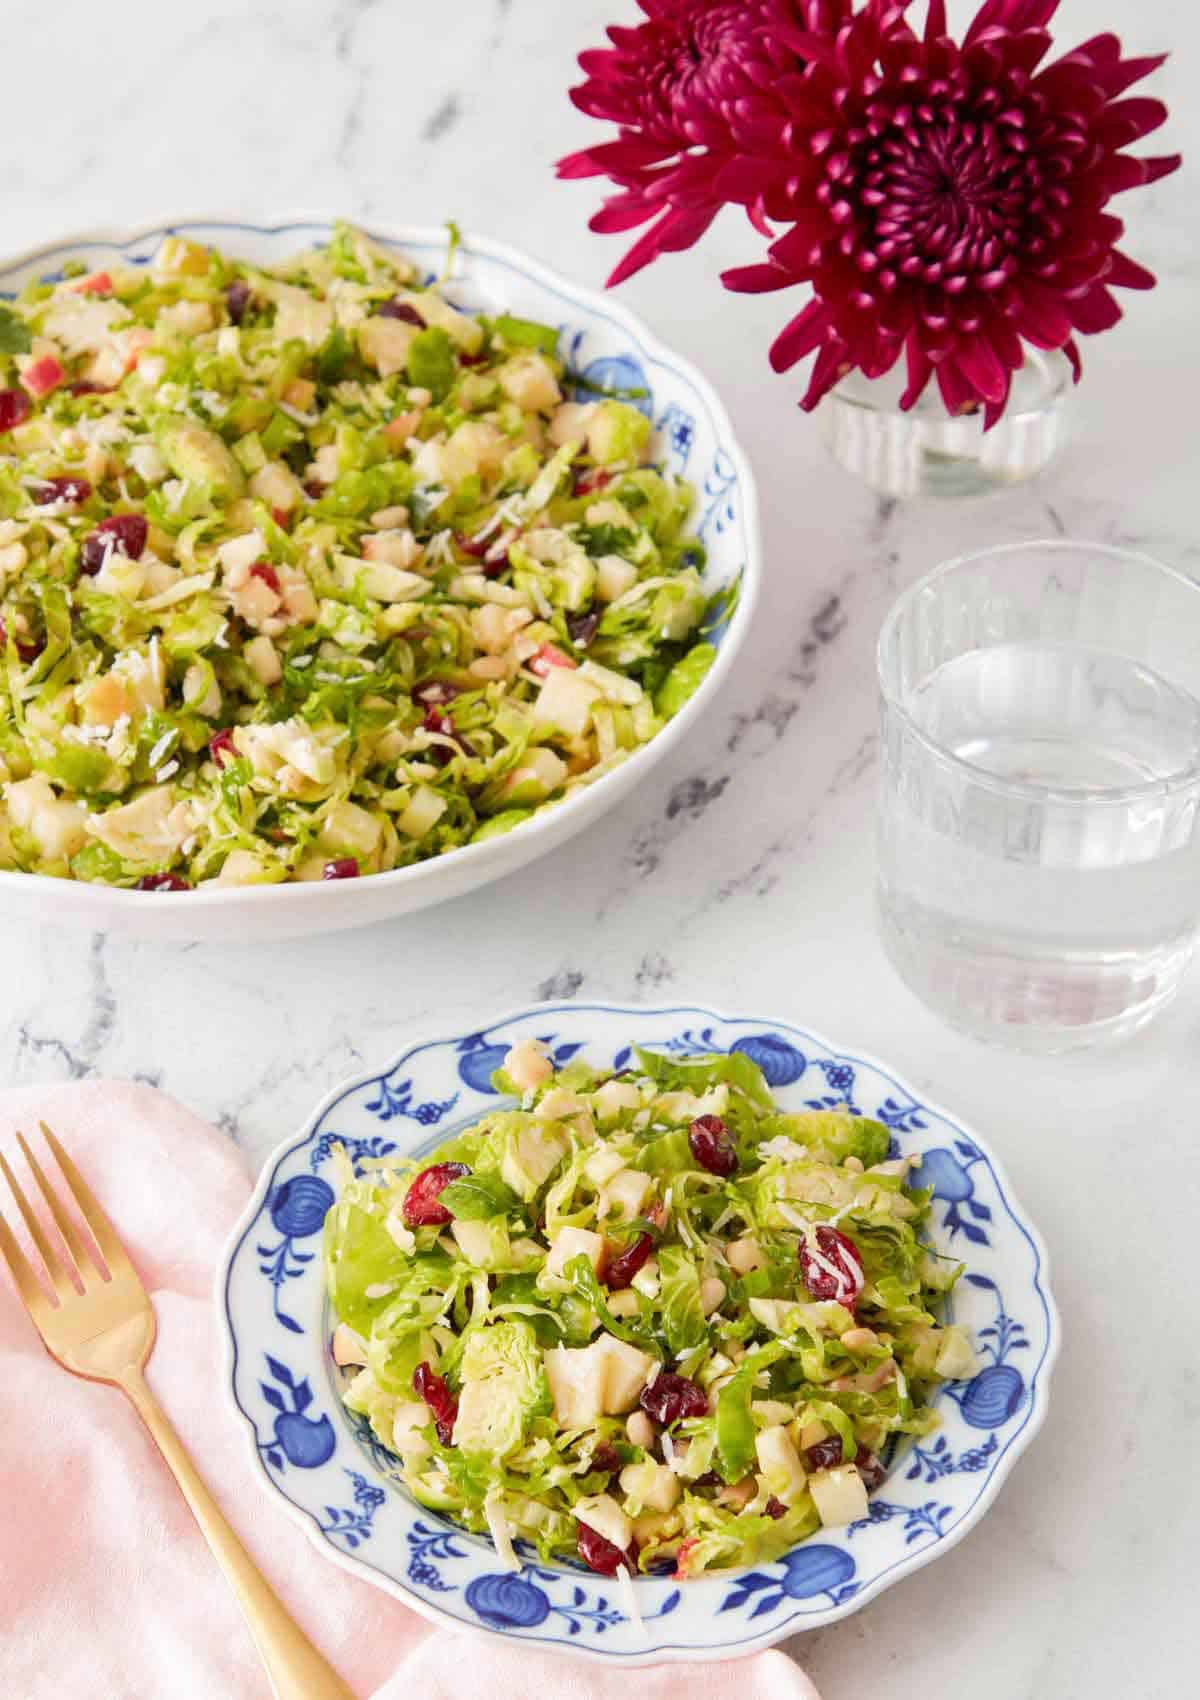 A plate of Brussels sprout salad with a large serving bowl with more in the background.